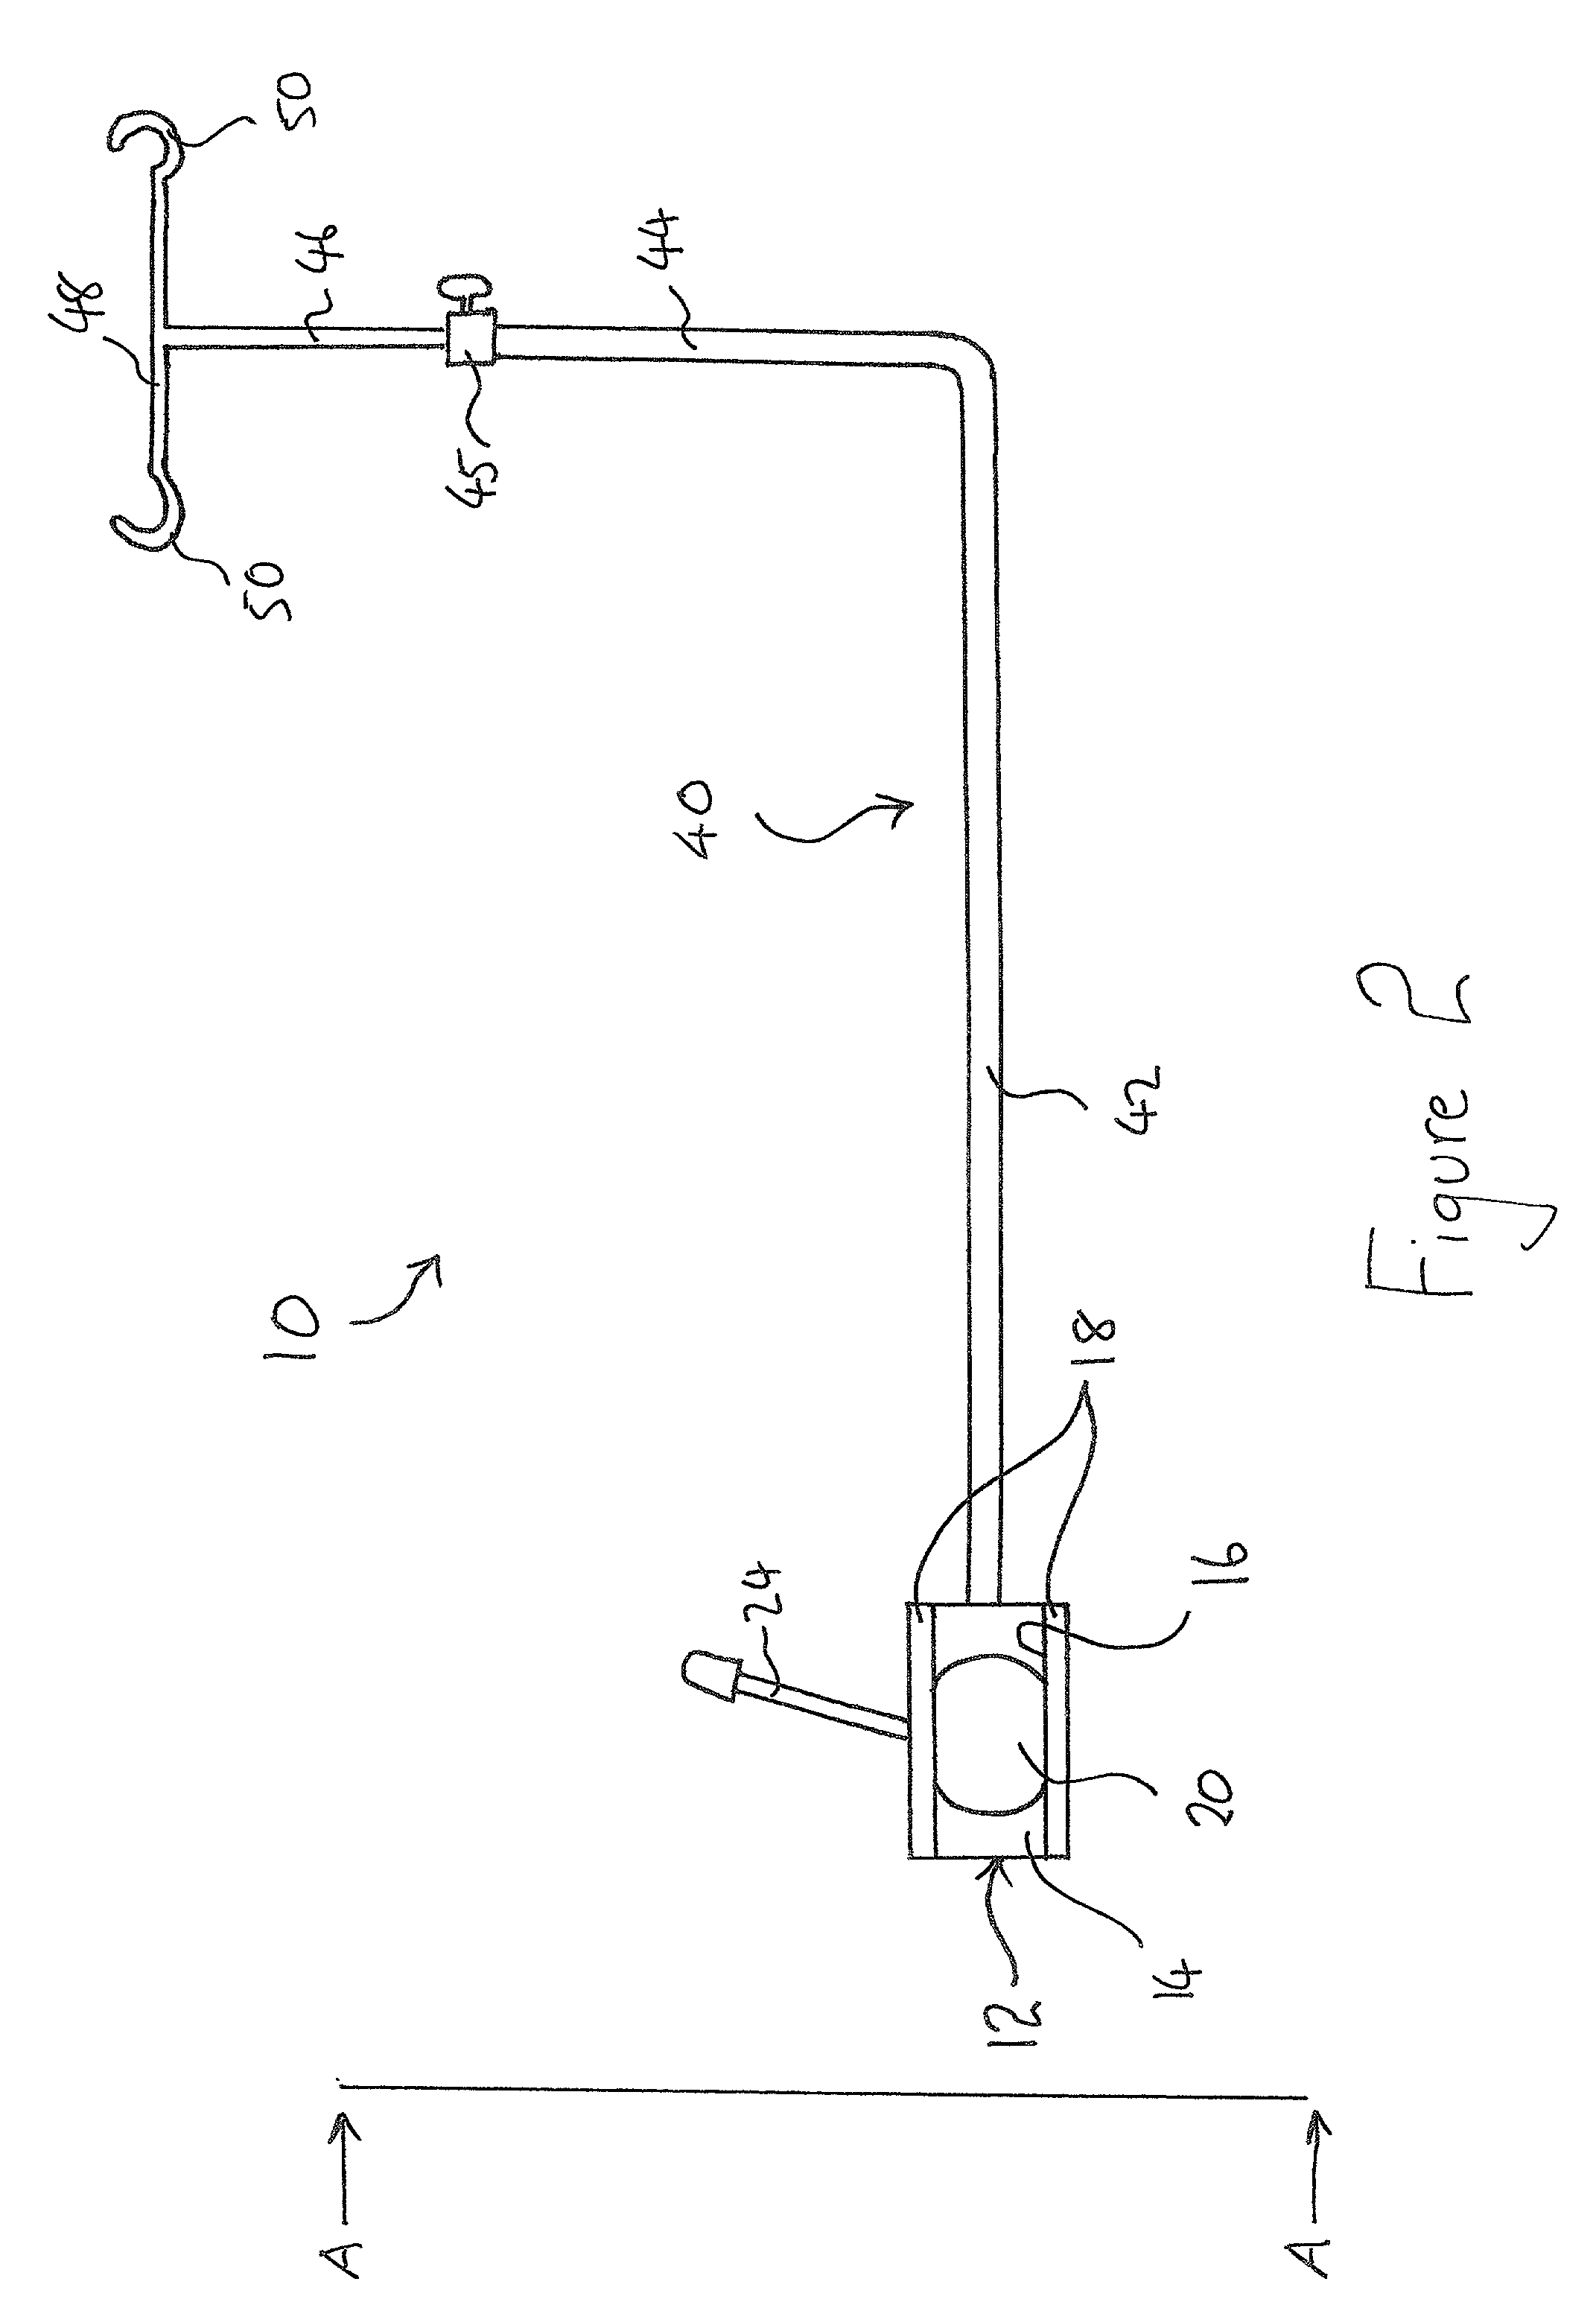 Apparatus for supporting medical fluids